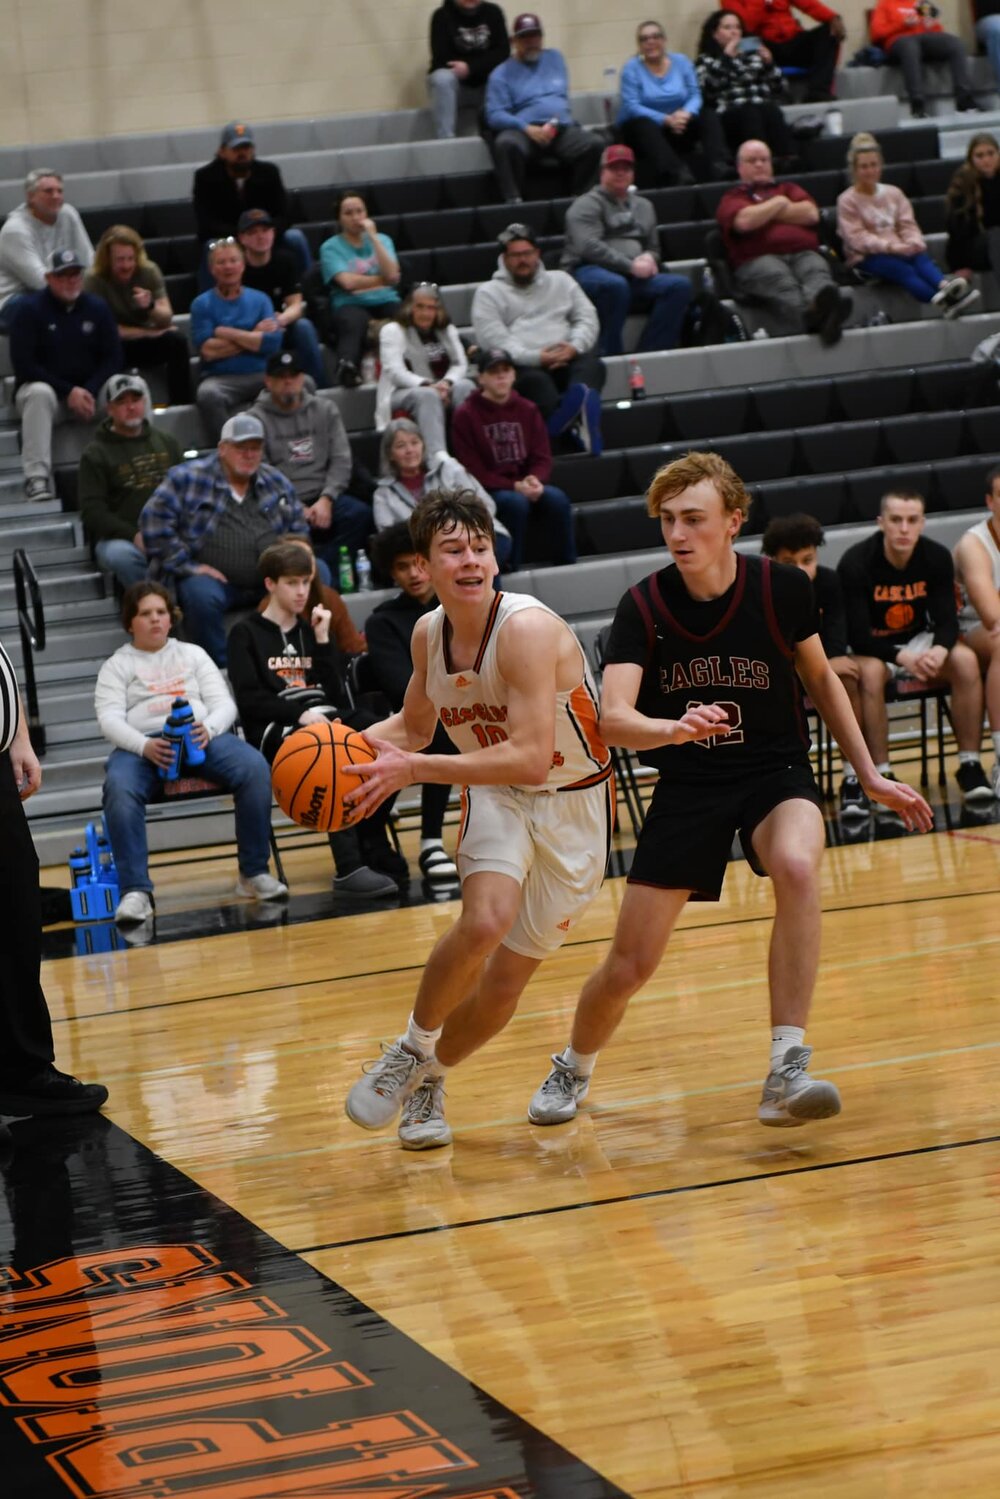 Henry Stone (10) drives baseline against a tenacious Eagleville defense. He finished Tuesday's contest with 10 points.